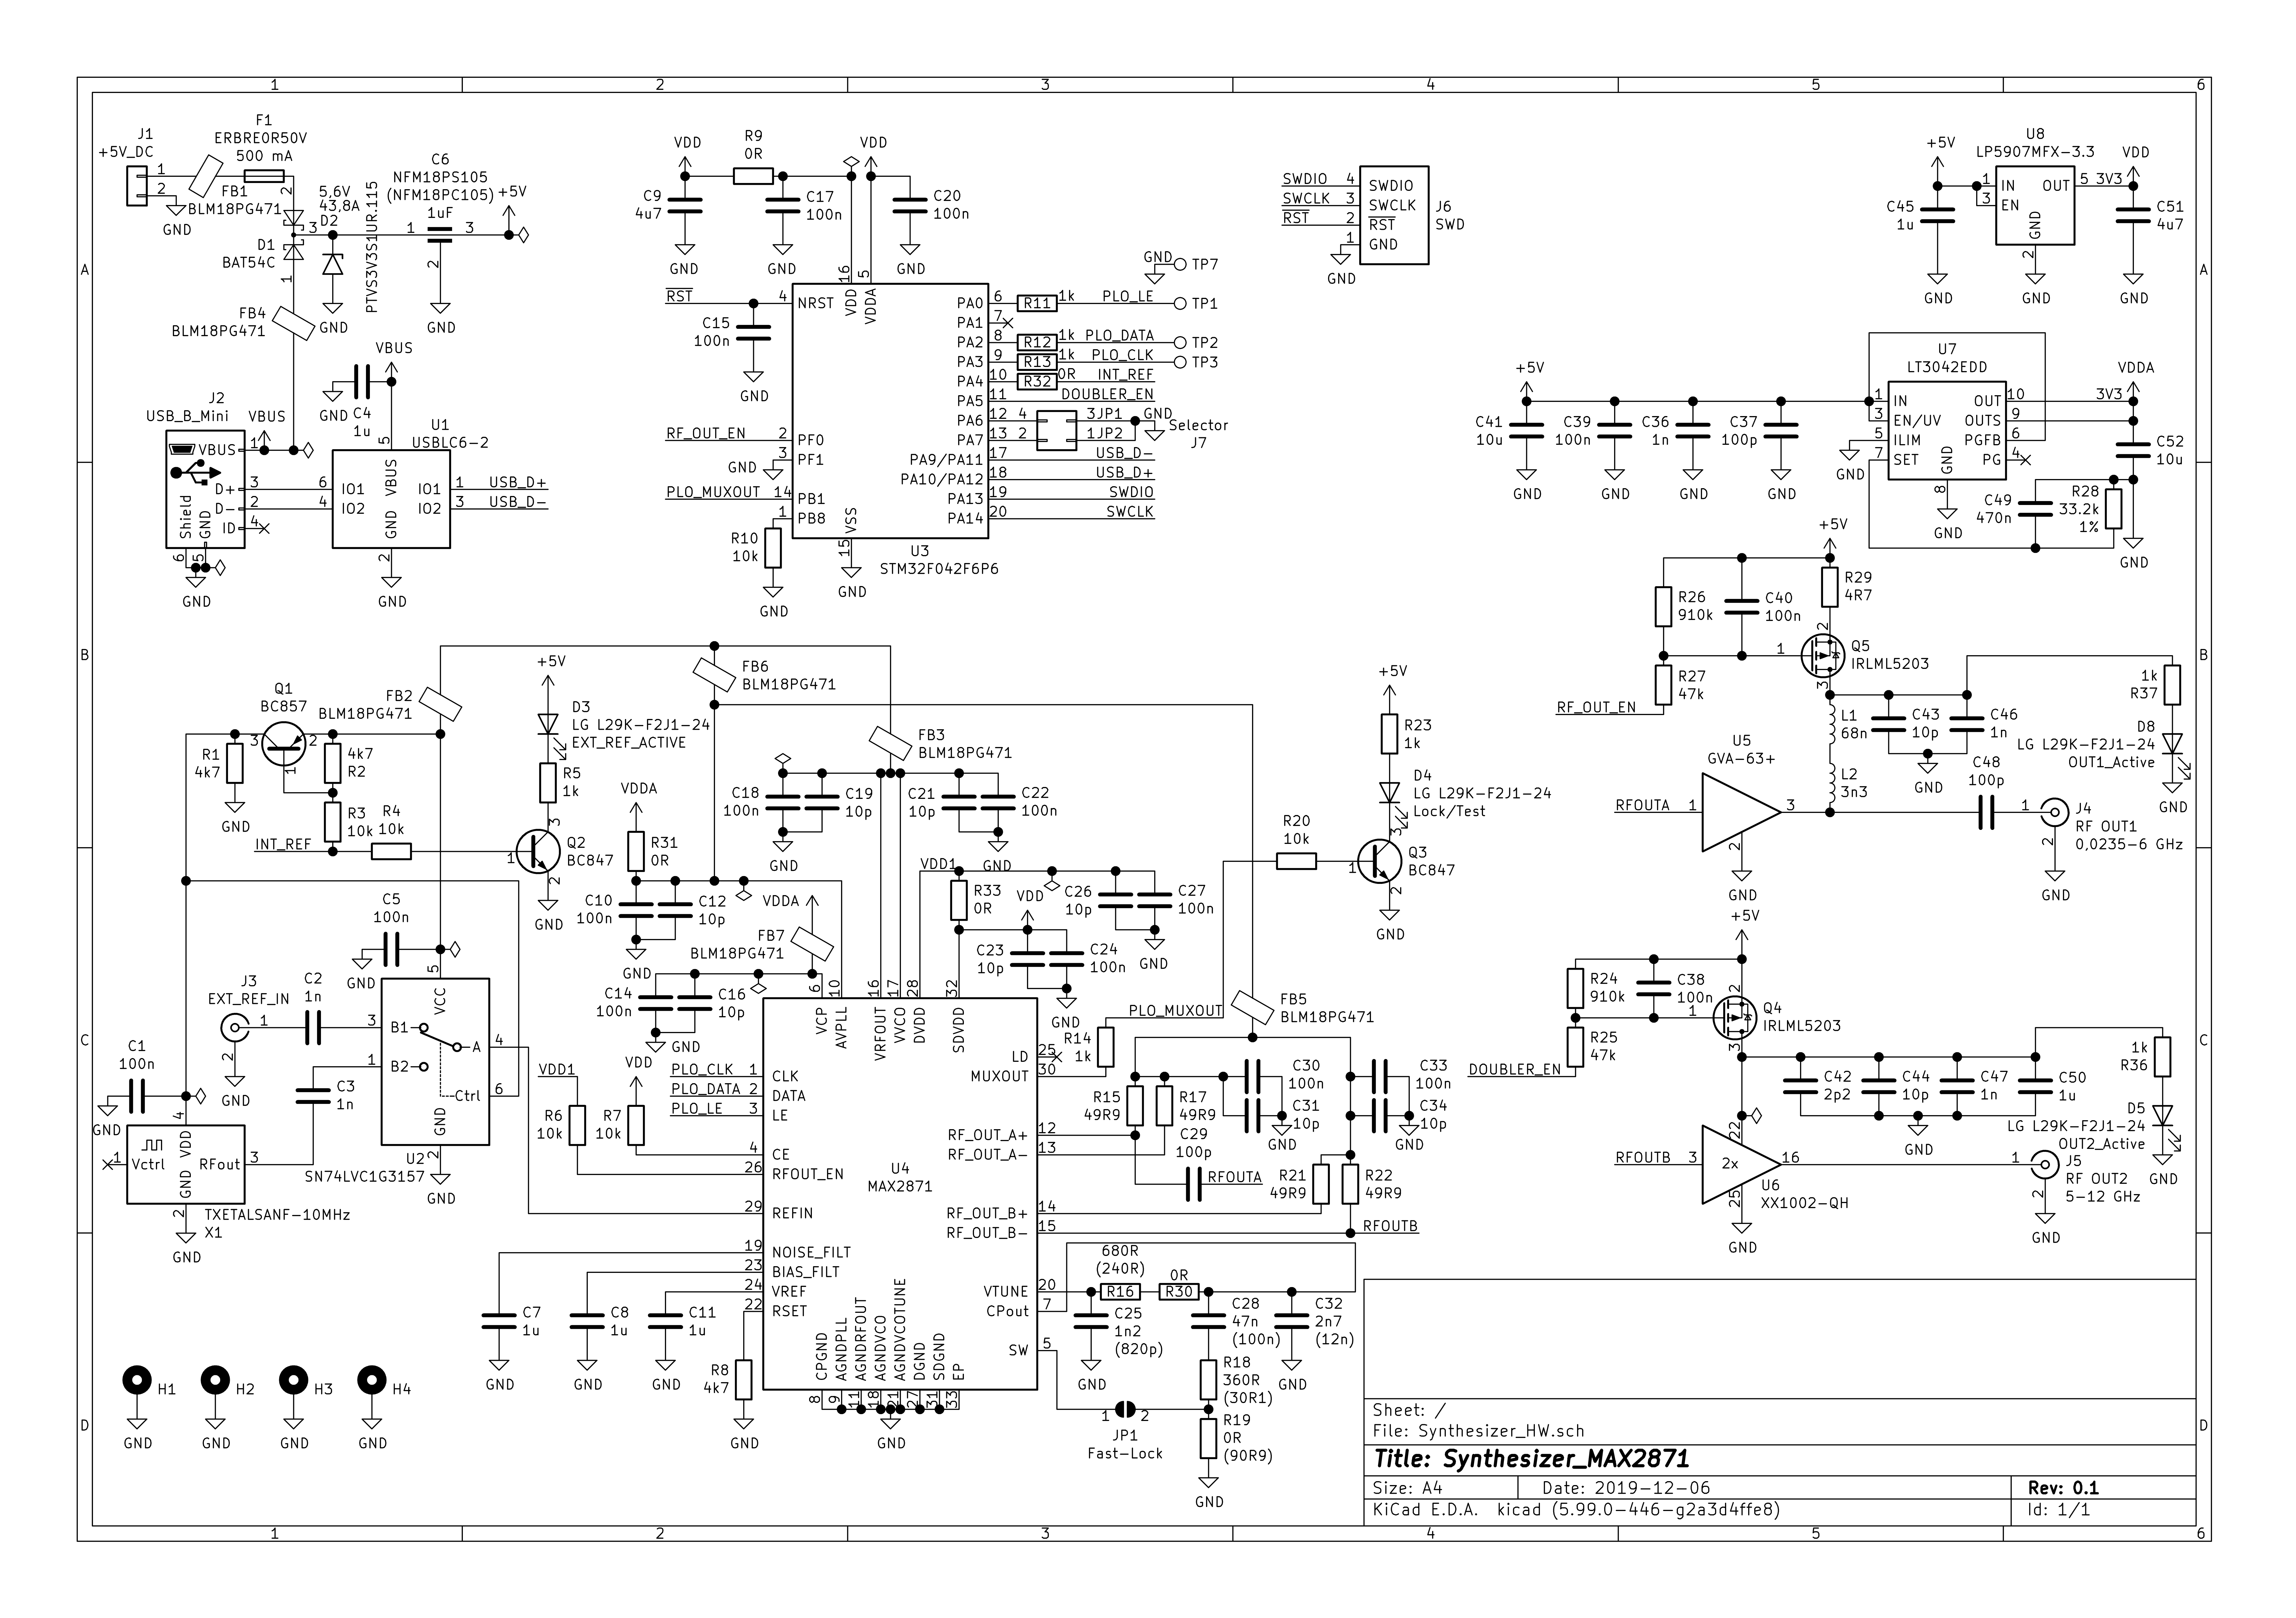 Synthesizer_HW_full_schematic.png